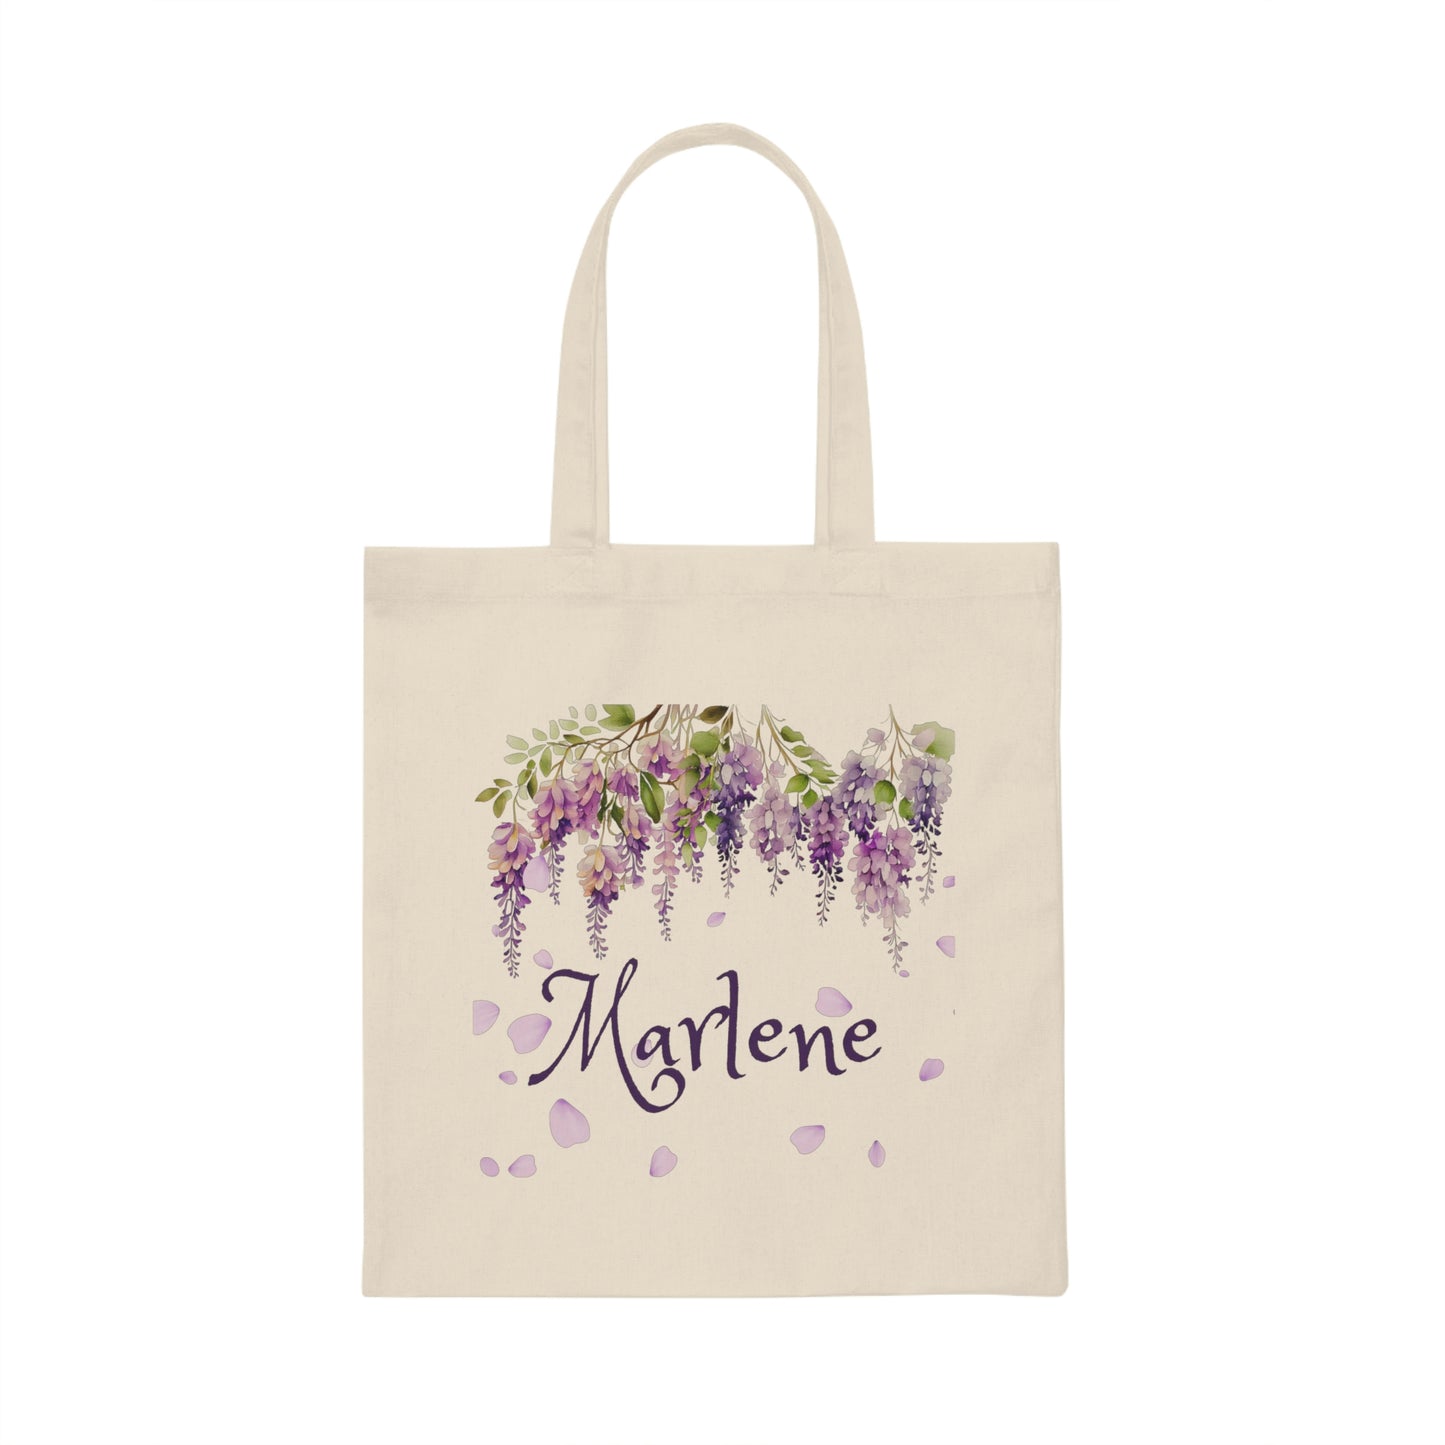 Wisteria Flowers and Petals Falling Canvas Tote Bag